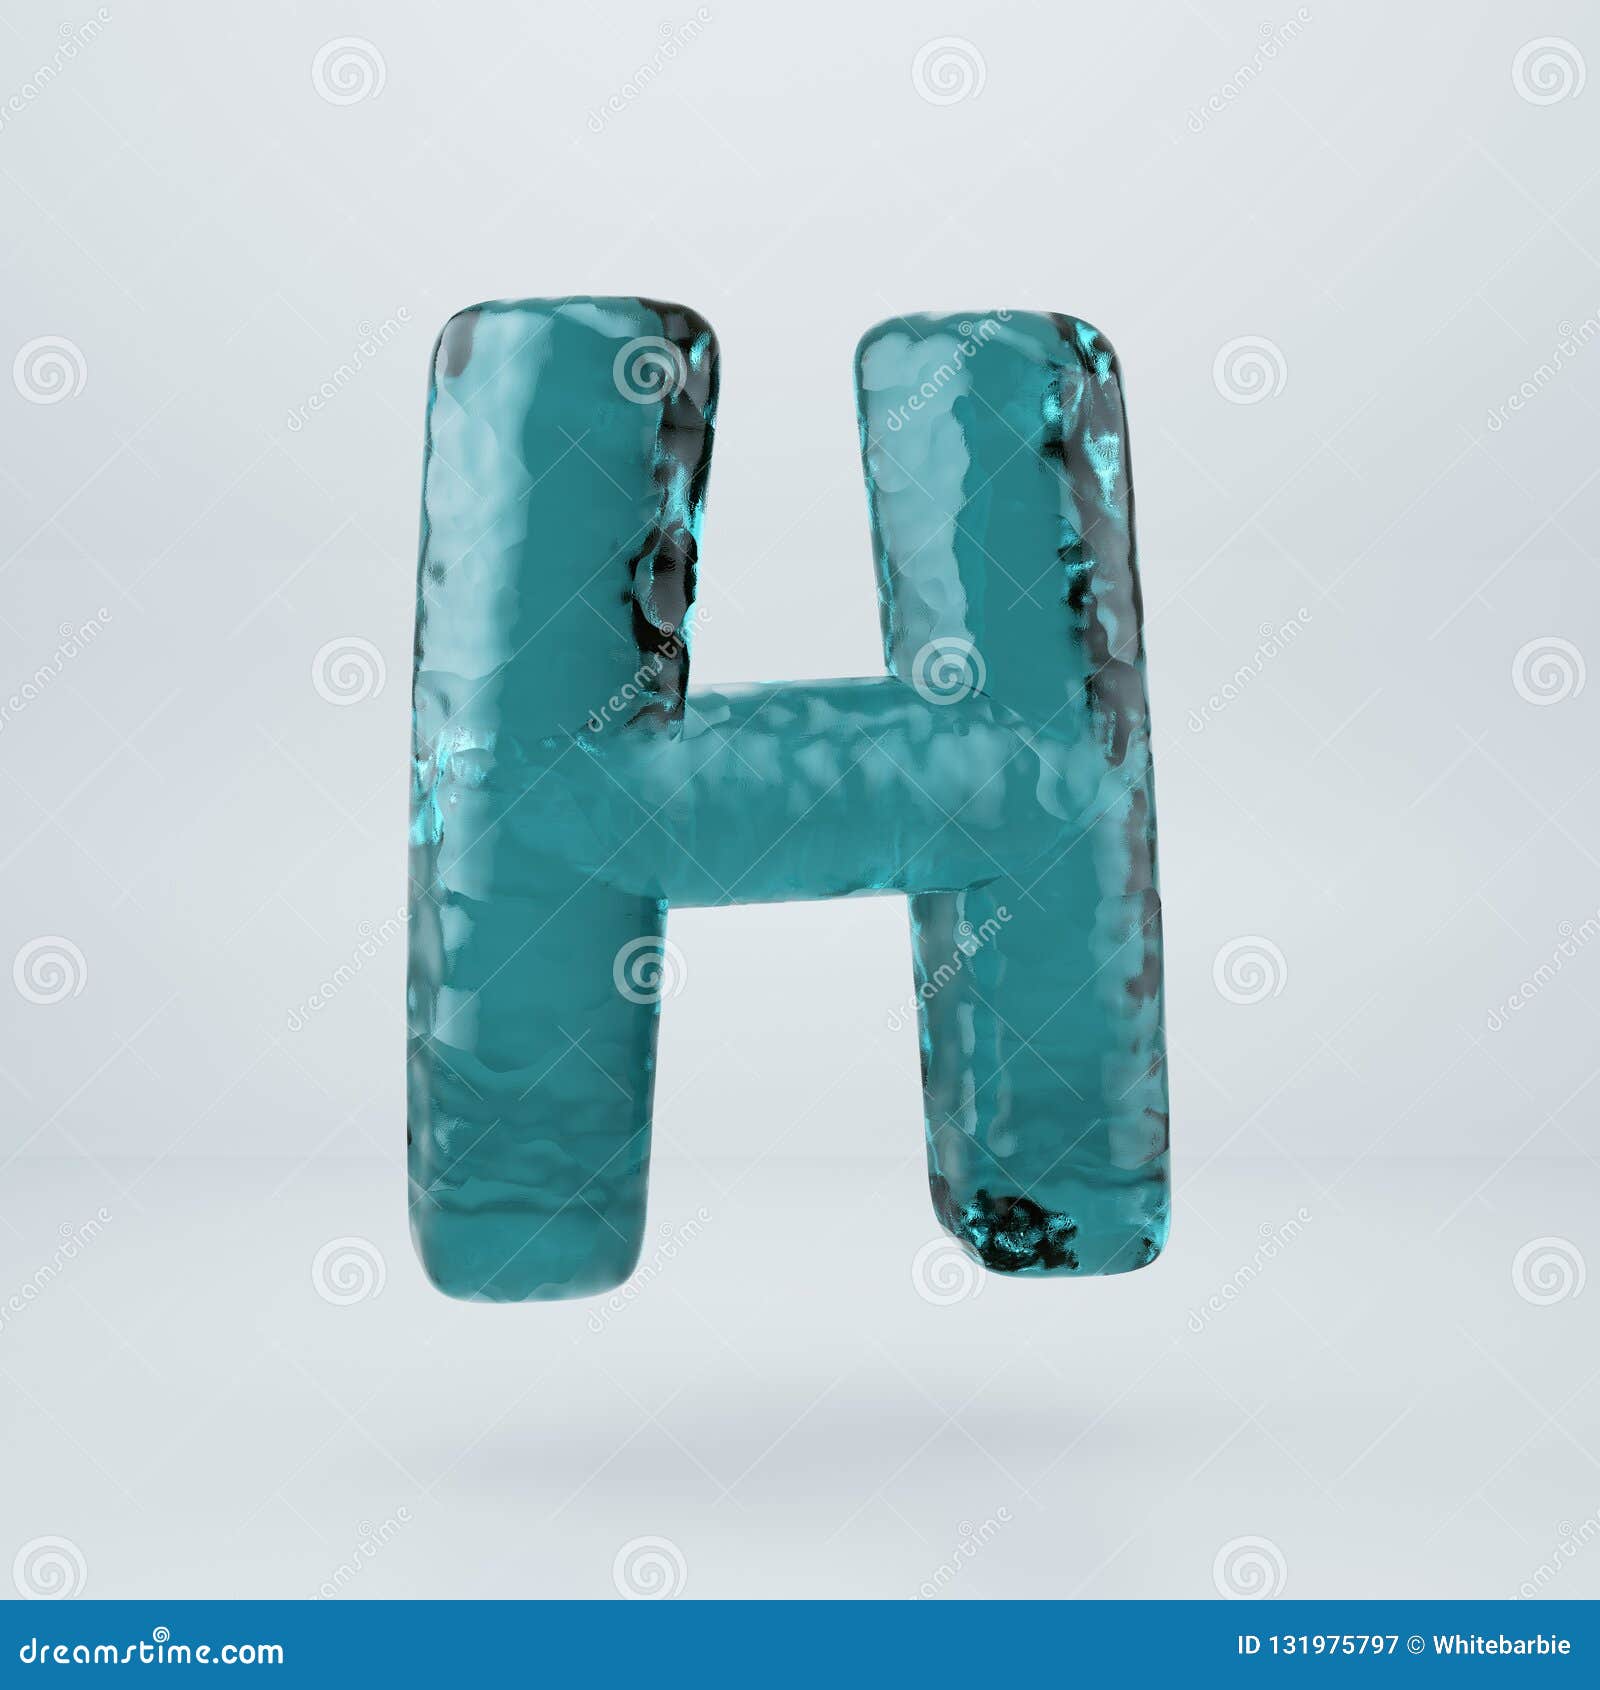 Ocean Water Letter H Uppercase Isolated On White Background Stock ...